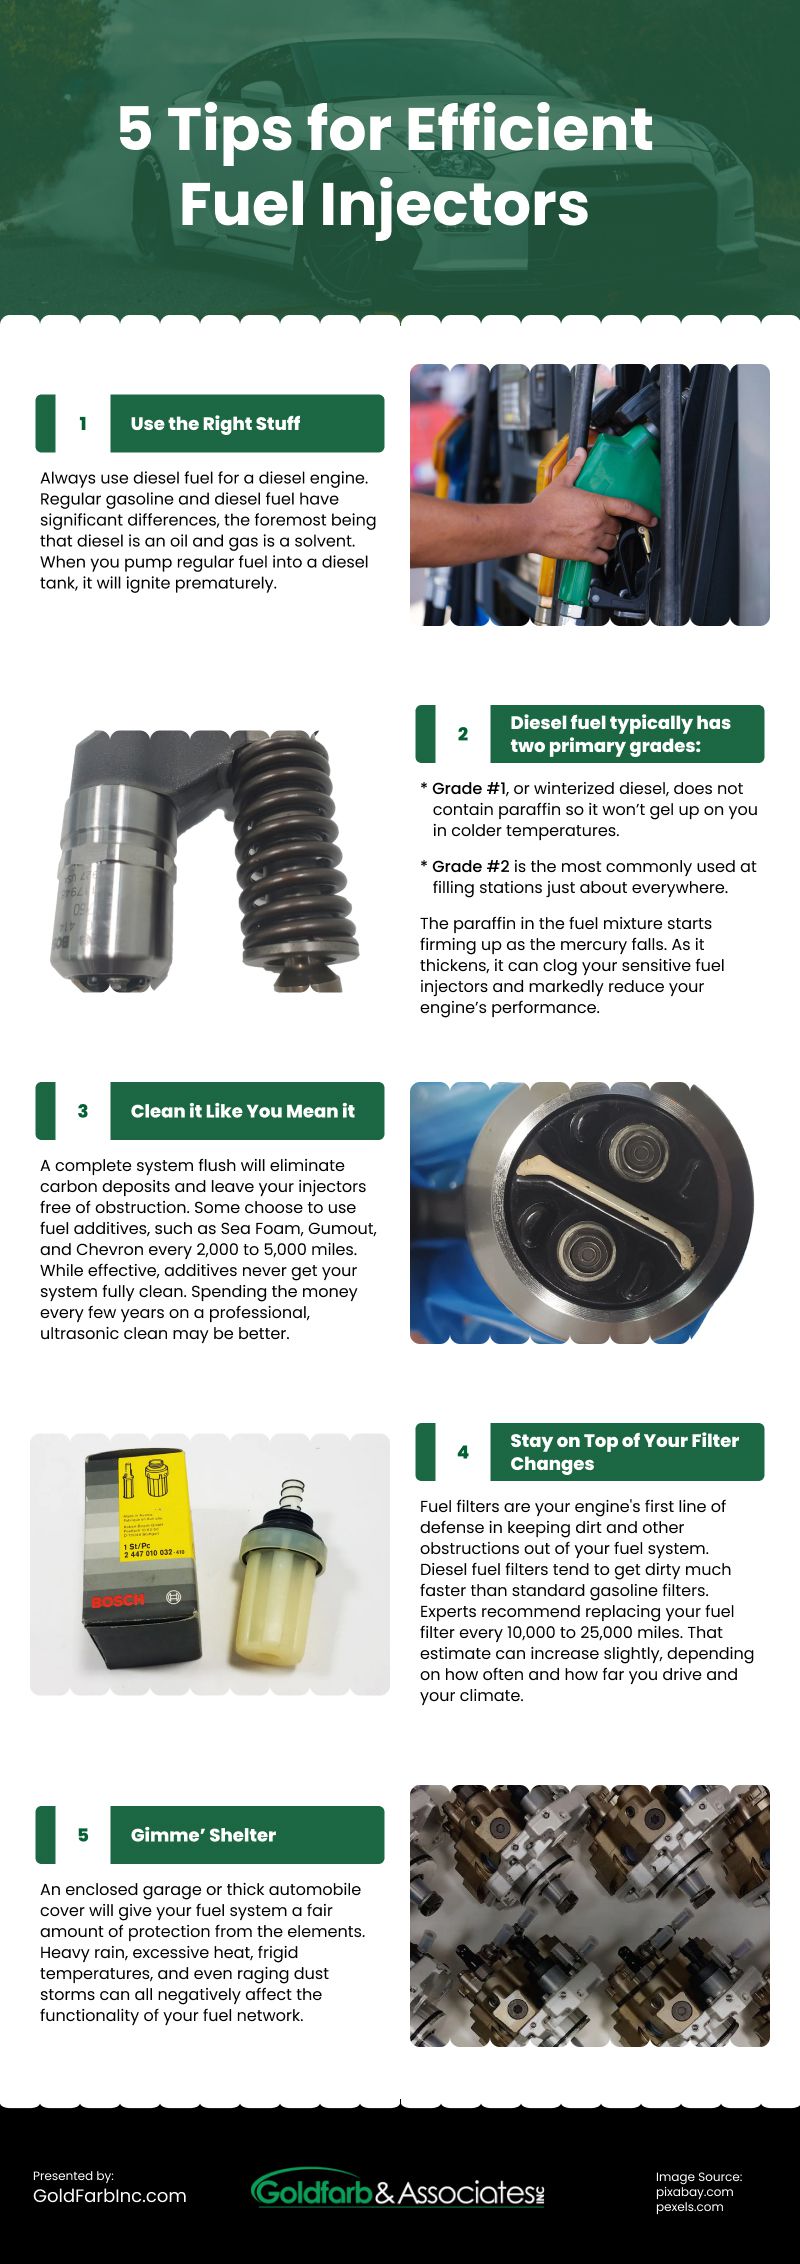 5 Tips for Efficient Fuel Injectors Infographic